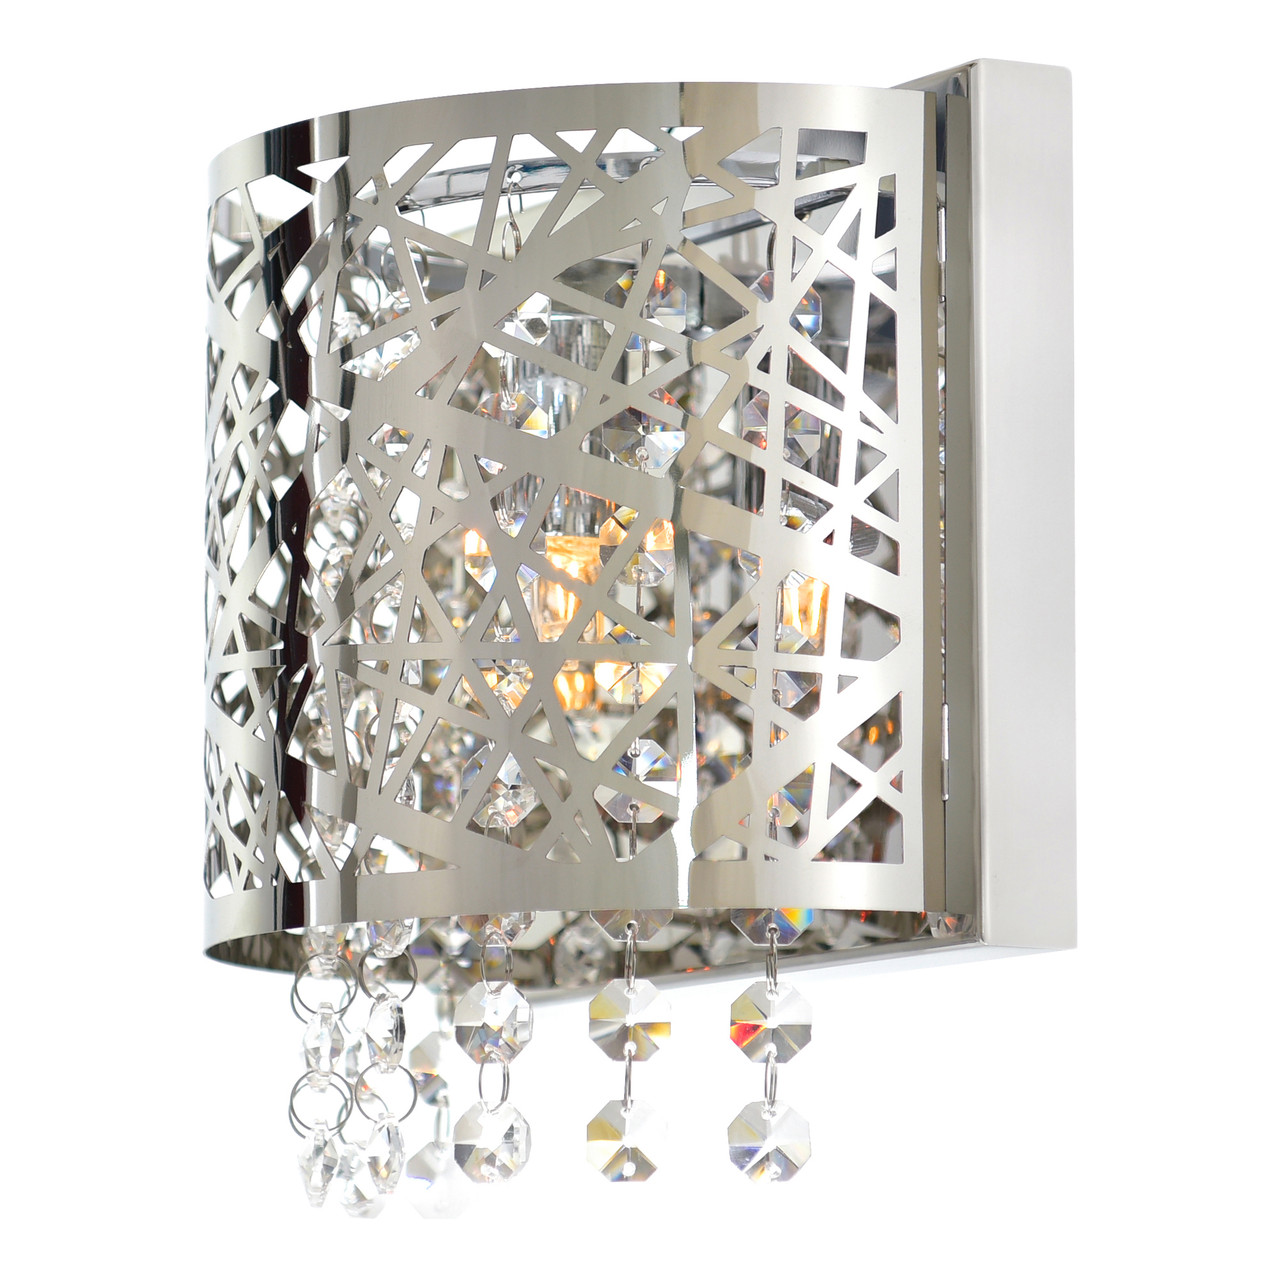 CWI LIGHTING 5008W7ST-R-1 1 Light Bathroom Sconce with Chrome finish